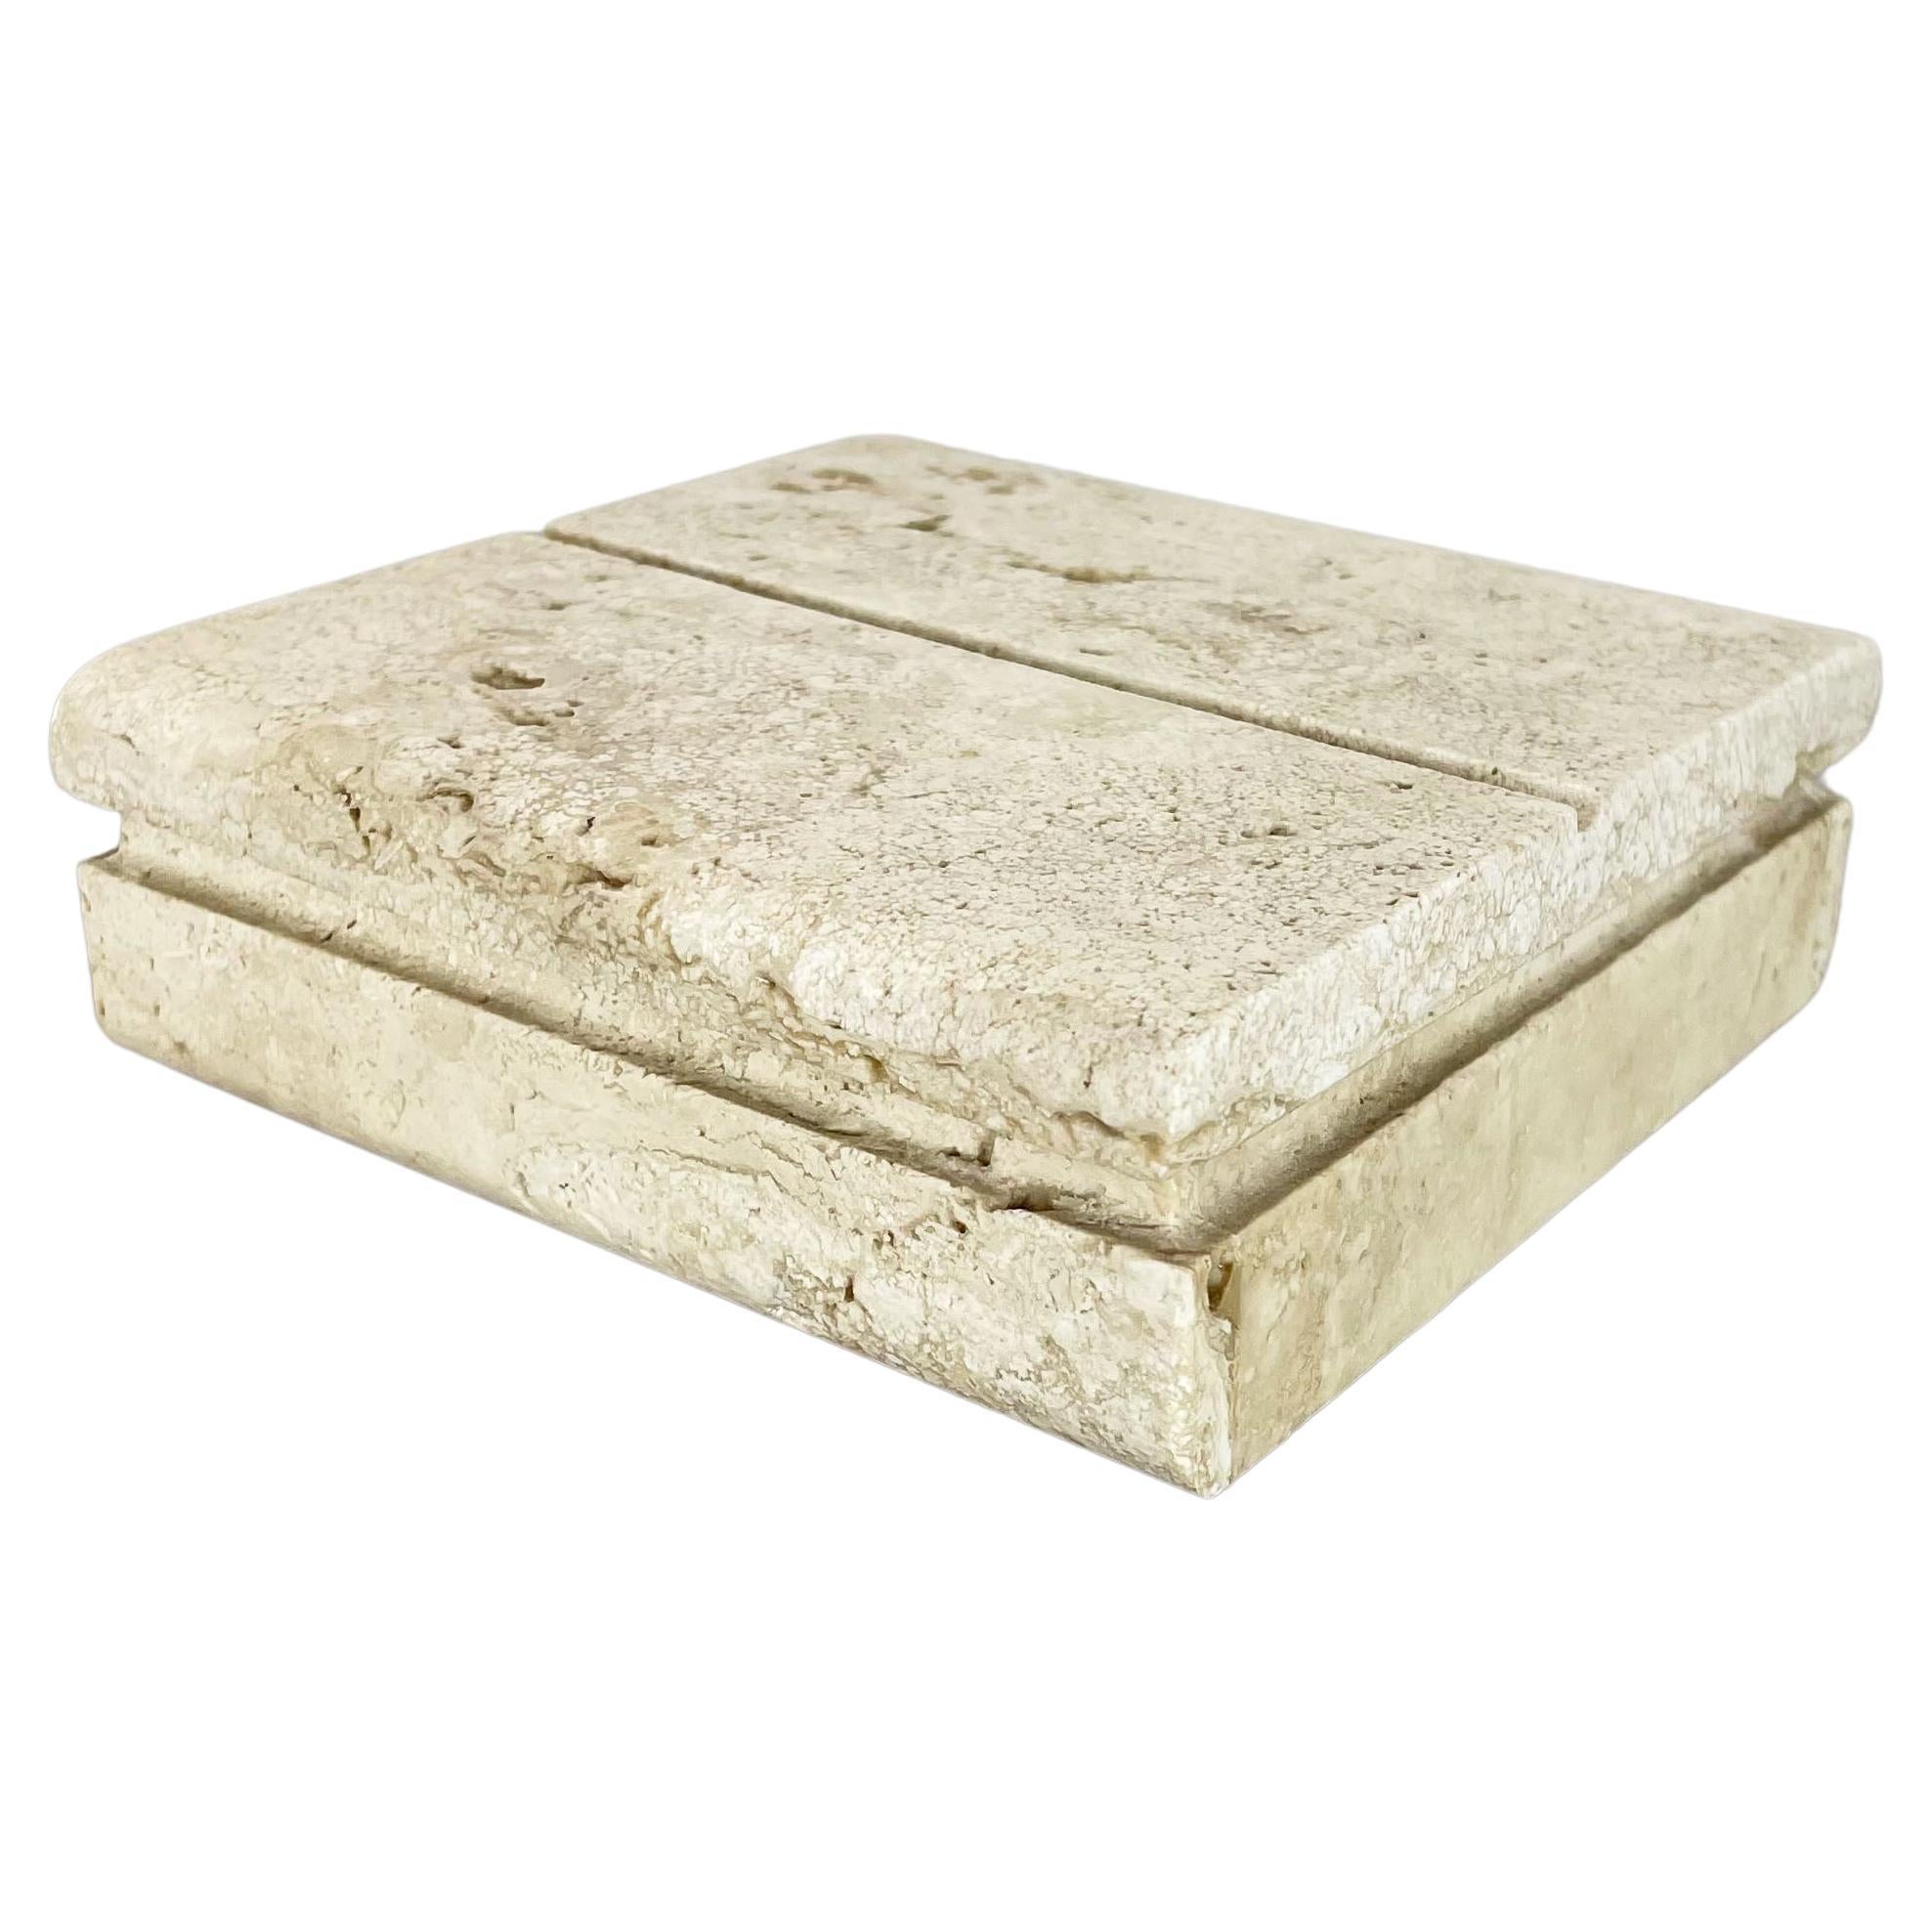 Modernist Travertine Marble Box Vide Poche by Fratelli Mannelli, Italy, 1970s For Sale